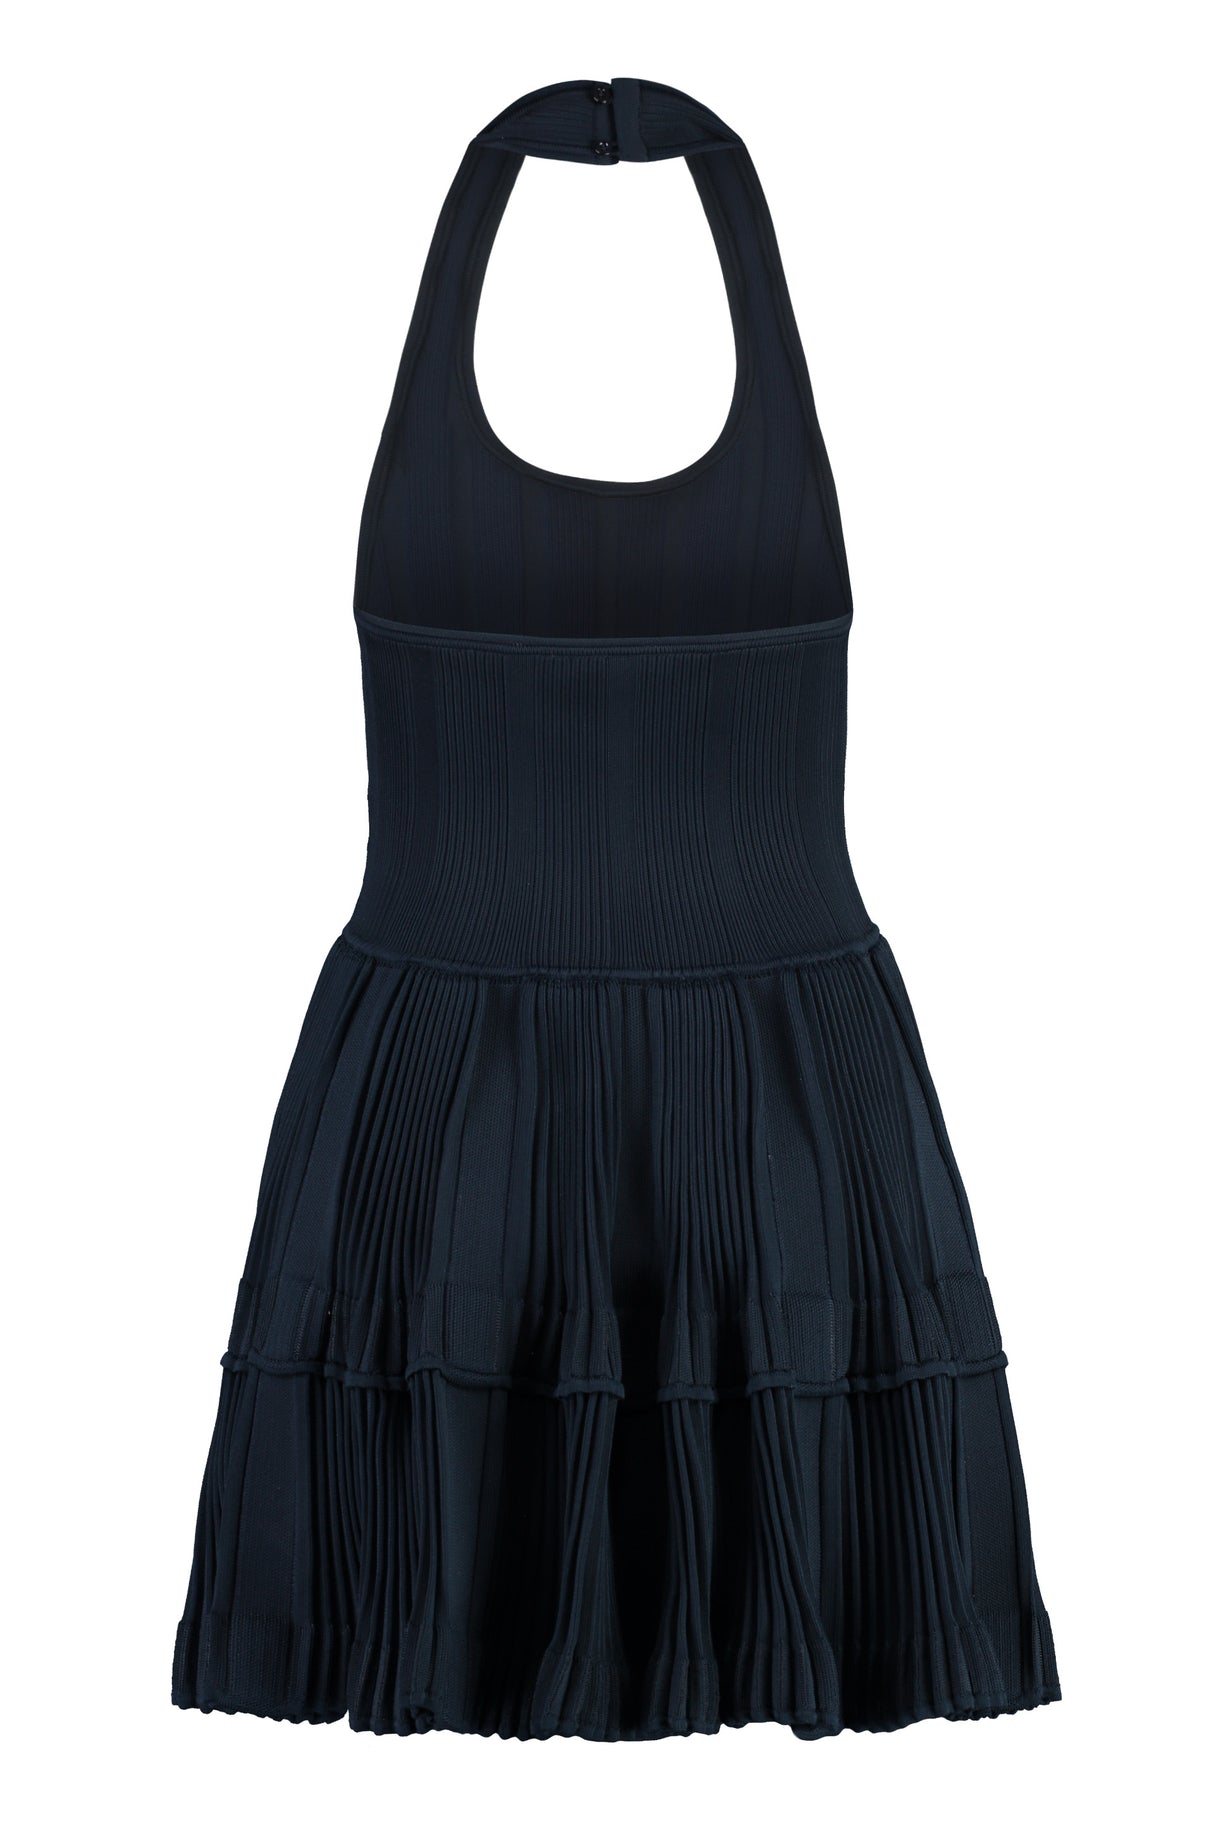 ALAIA Blue Pleated Dress for Women - FW23 Collection